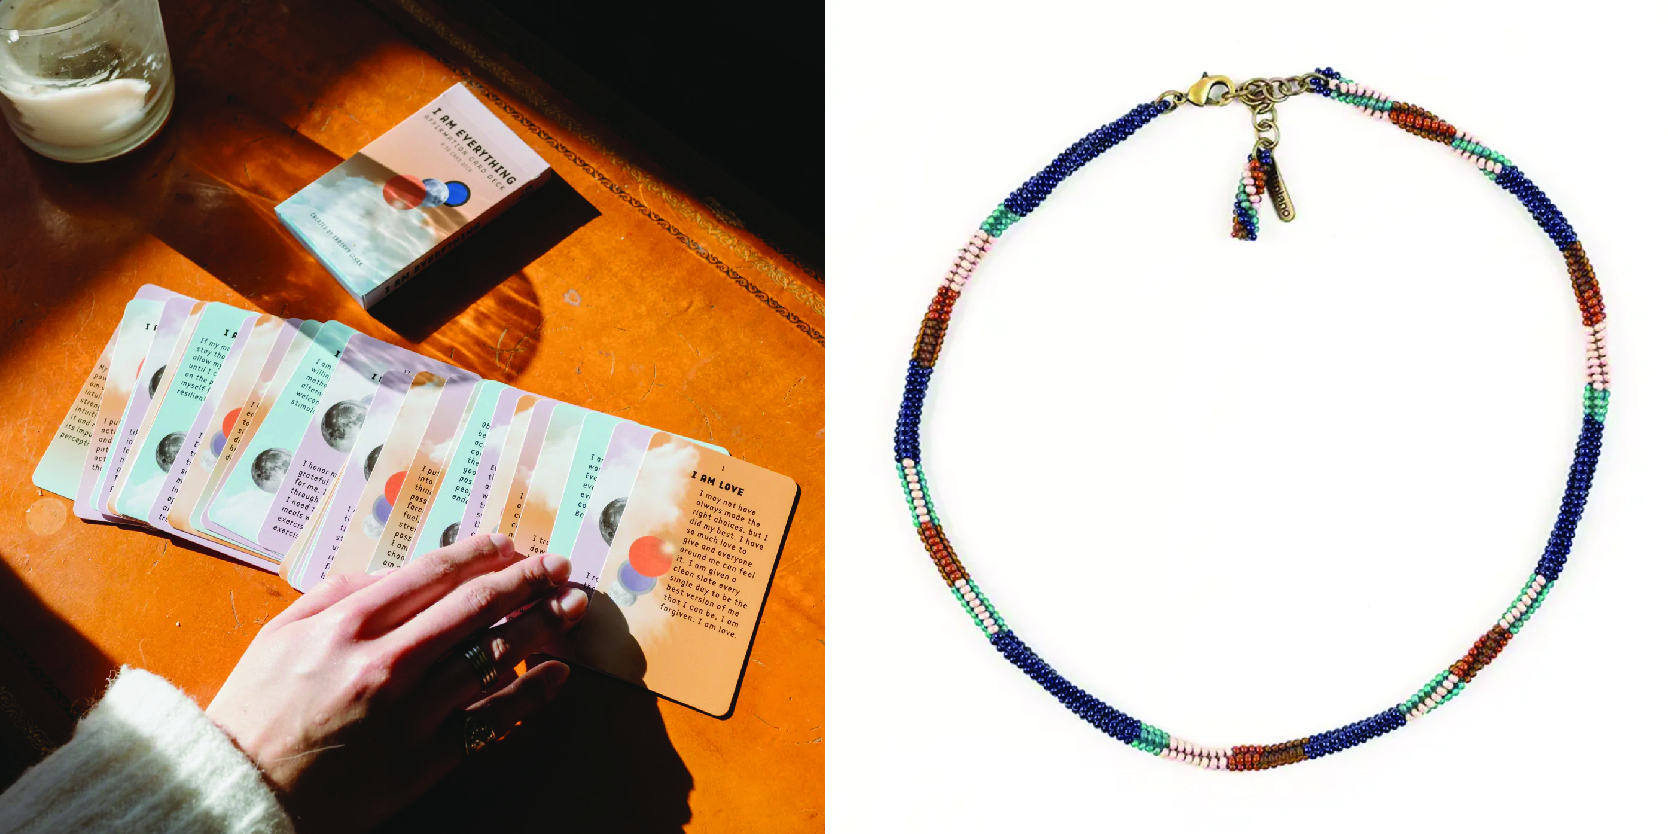 Two photos: one of a deck of cards laid out on a table and one of a beaded necklace.